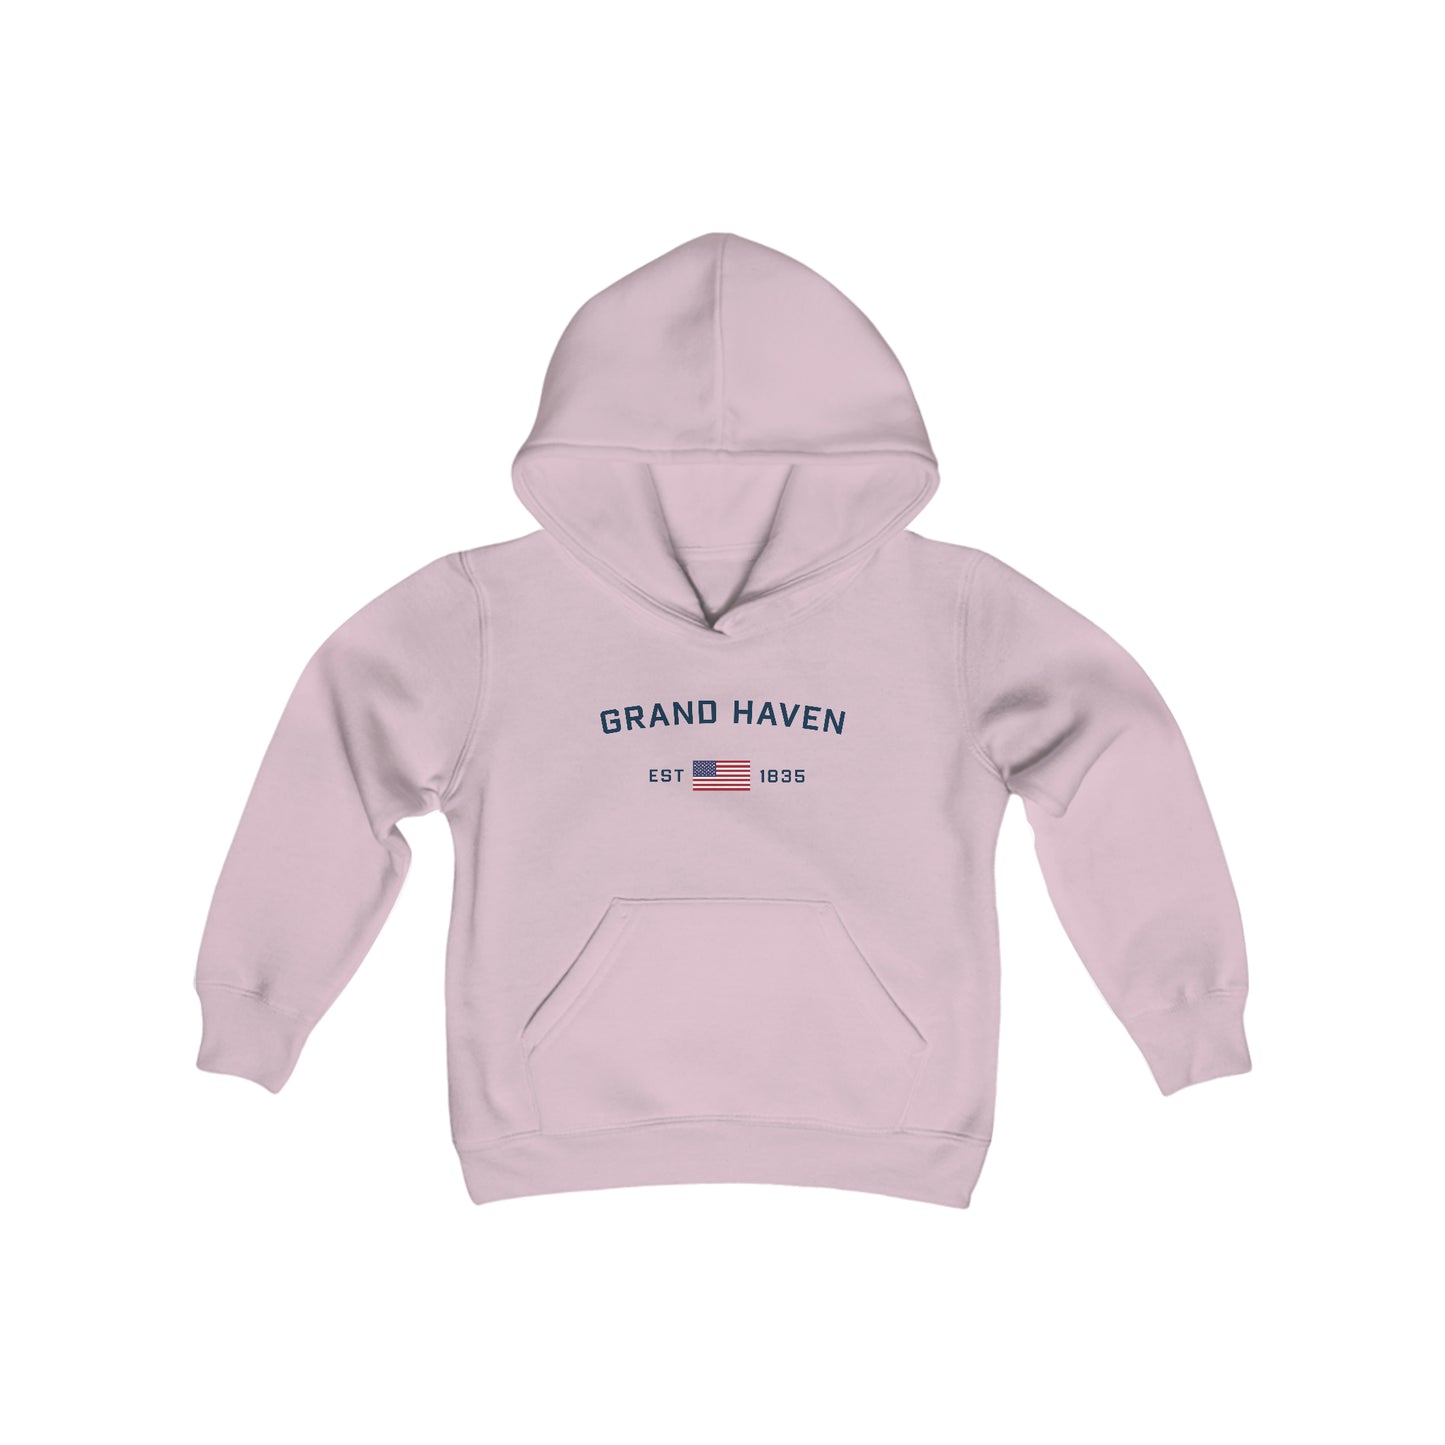 'Grand Haven EST 1835' Hoodie (w/USA Flag Outline) | Unisex Youth